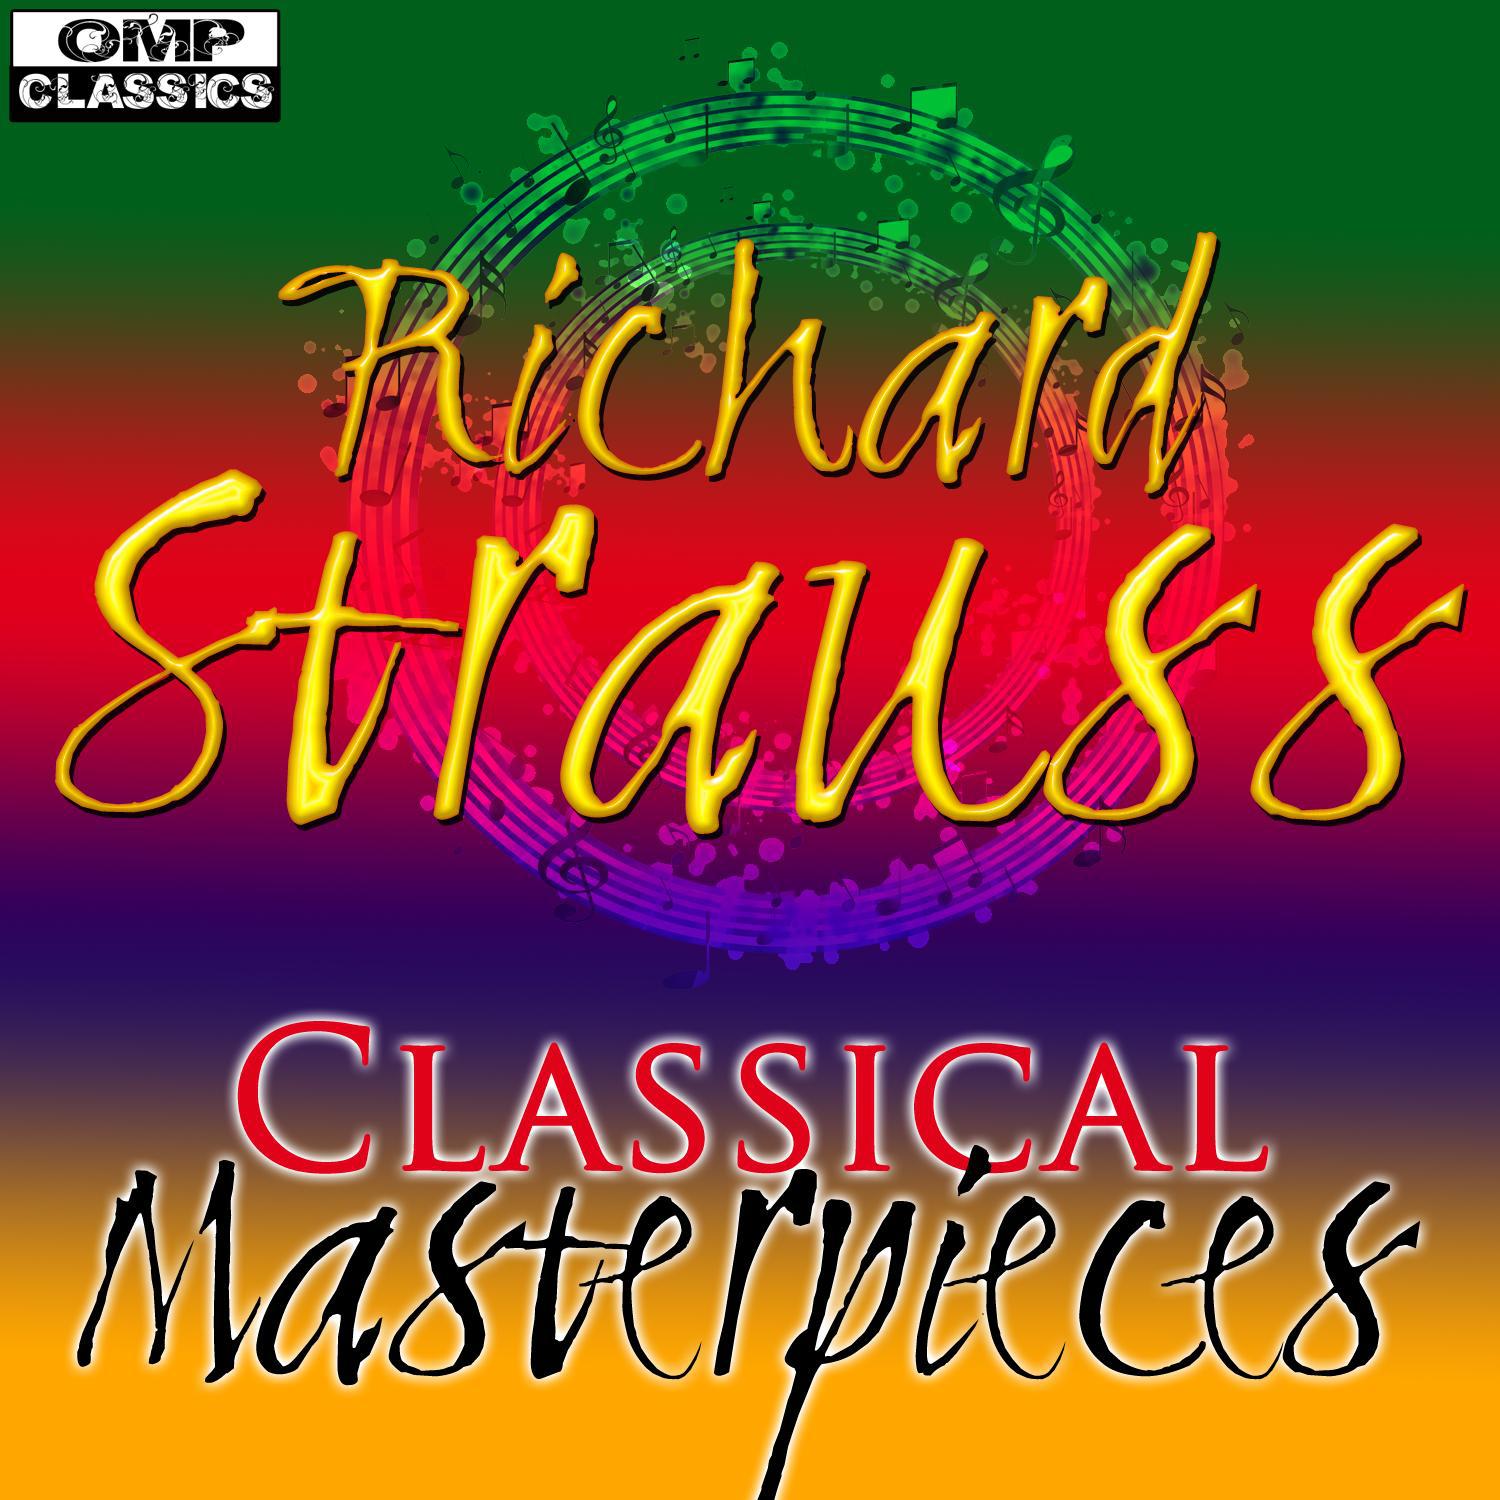 Richard Strauss: Classical Masterpieces